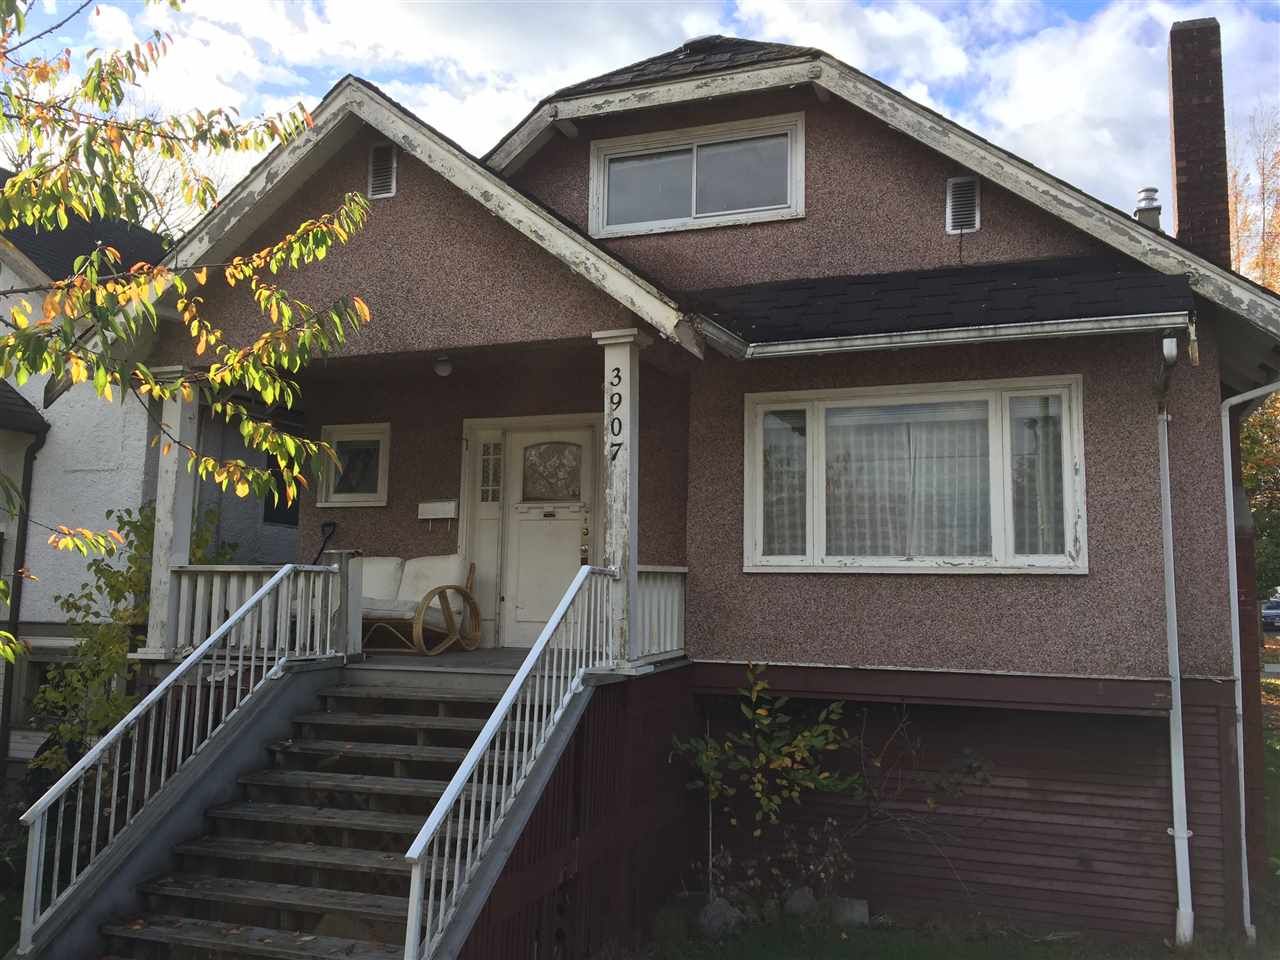 Main Photo: 3907 DUNBAR STREET in Vancouver: Dunbar House for sale (Vancouver West)  : MLS®# R2320713